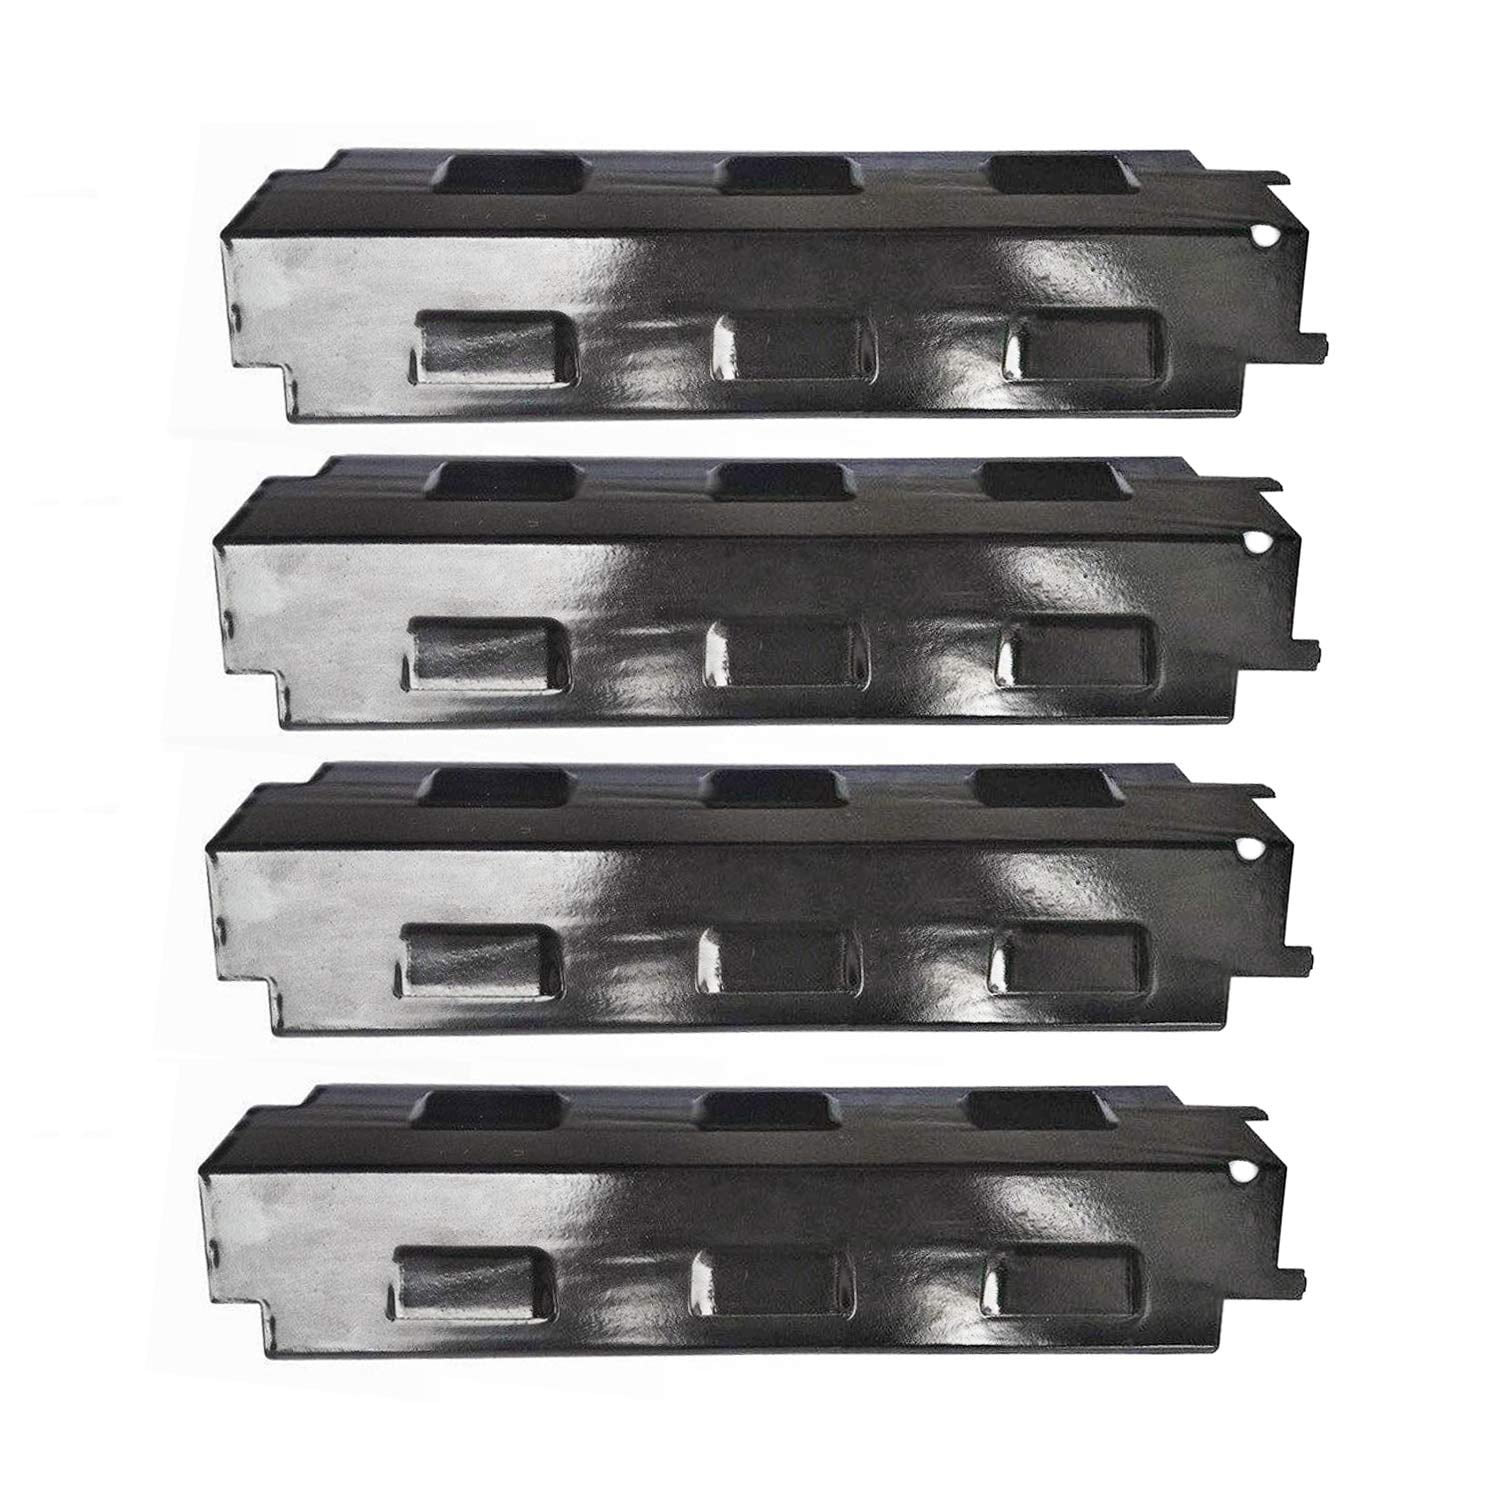 Hisencn Grill Heat Plate for Charbroil 6 Burner 463230515 463230514 Thermos, 